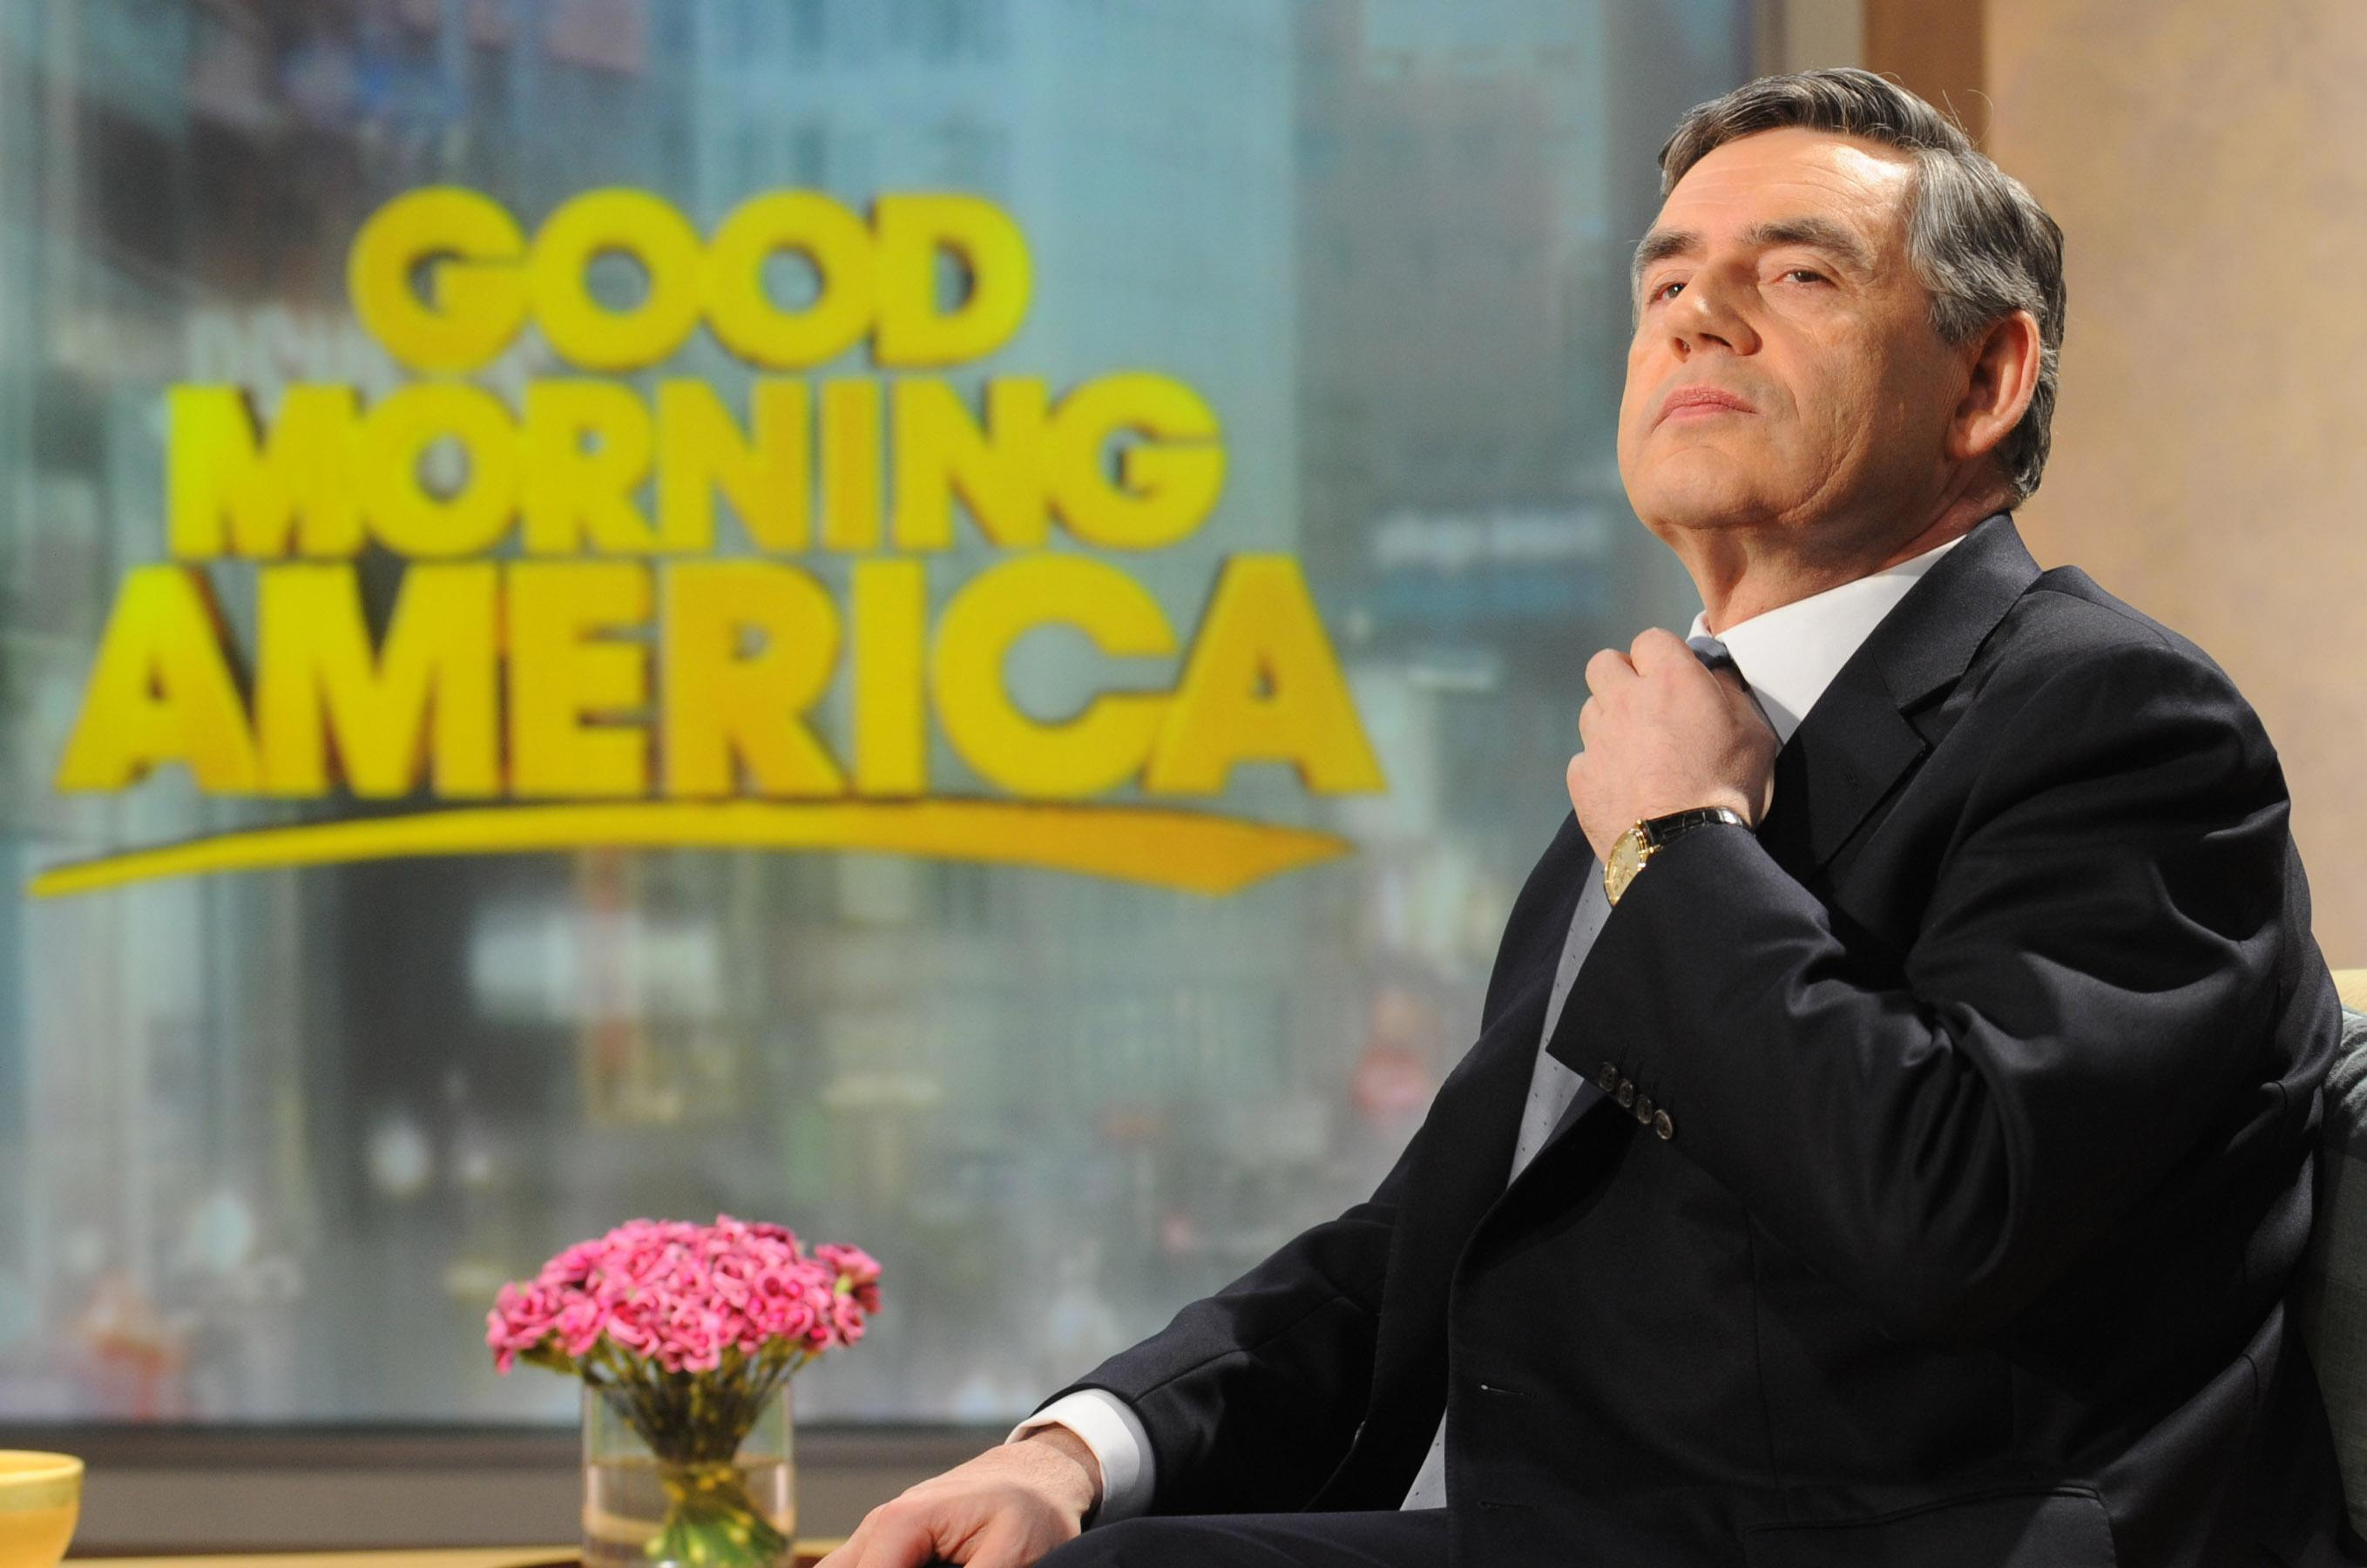 I Went on ‘Good Morning America,’ and It Was Far From Lights, Camera, Action